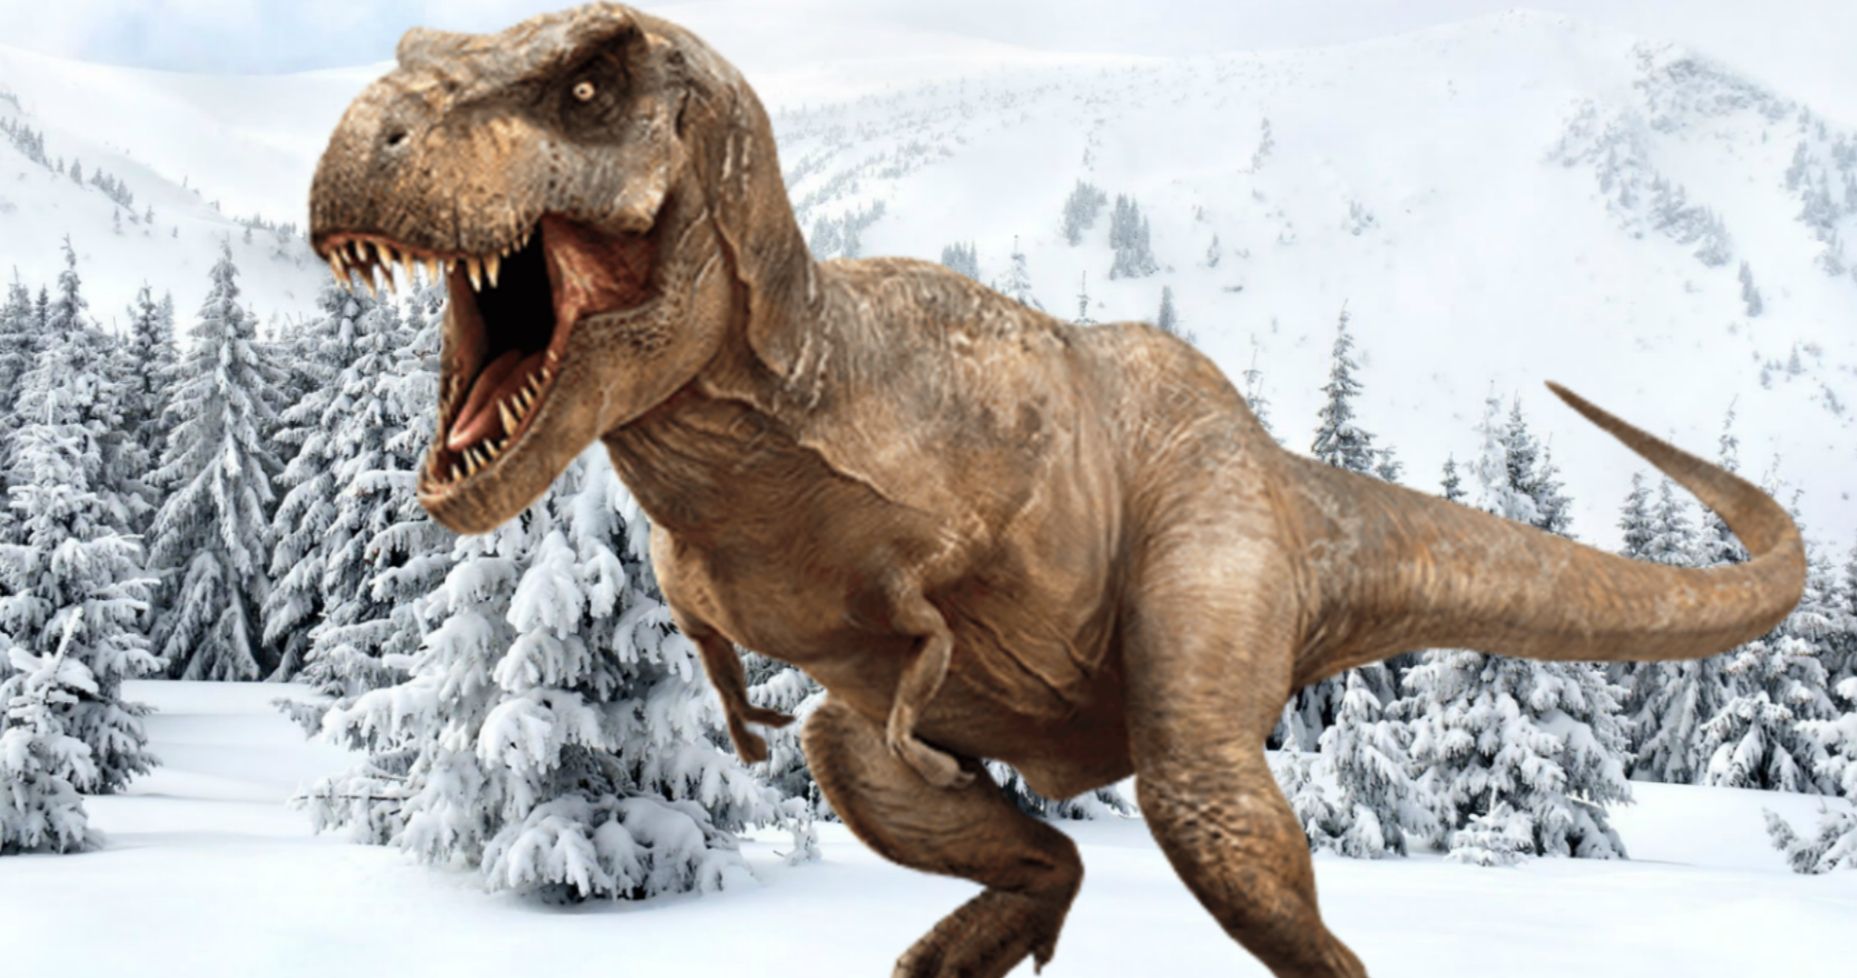 Jurassic World 3 Set Photo Confirms We'll See Dinosaurs in the Snow?